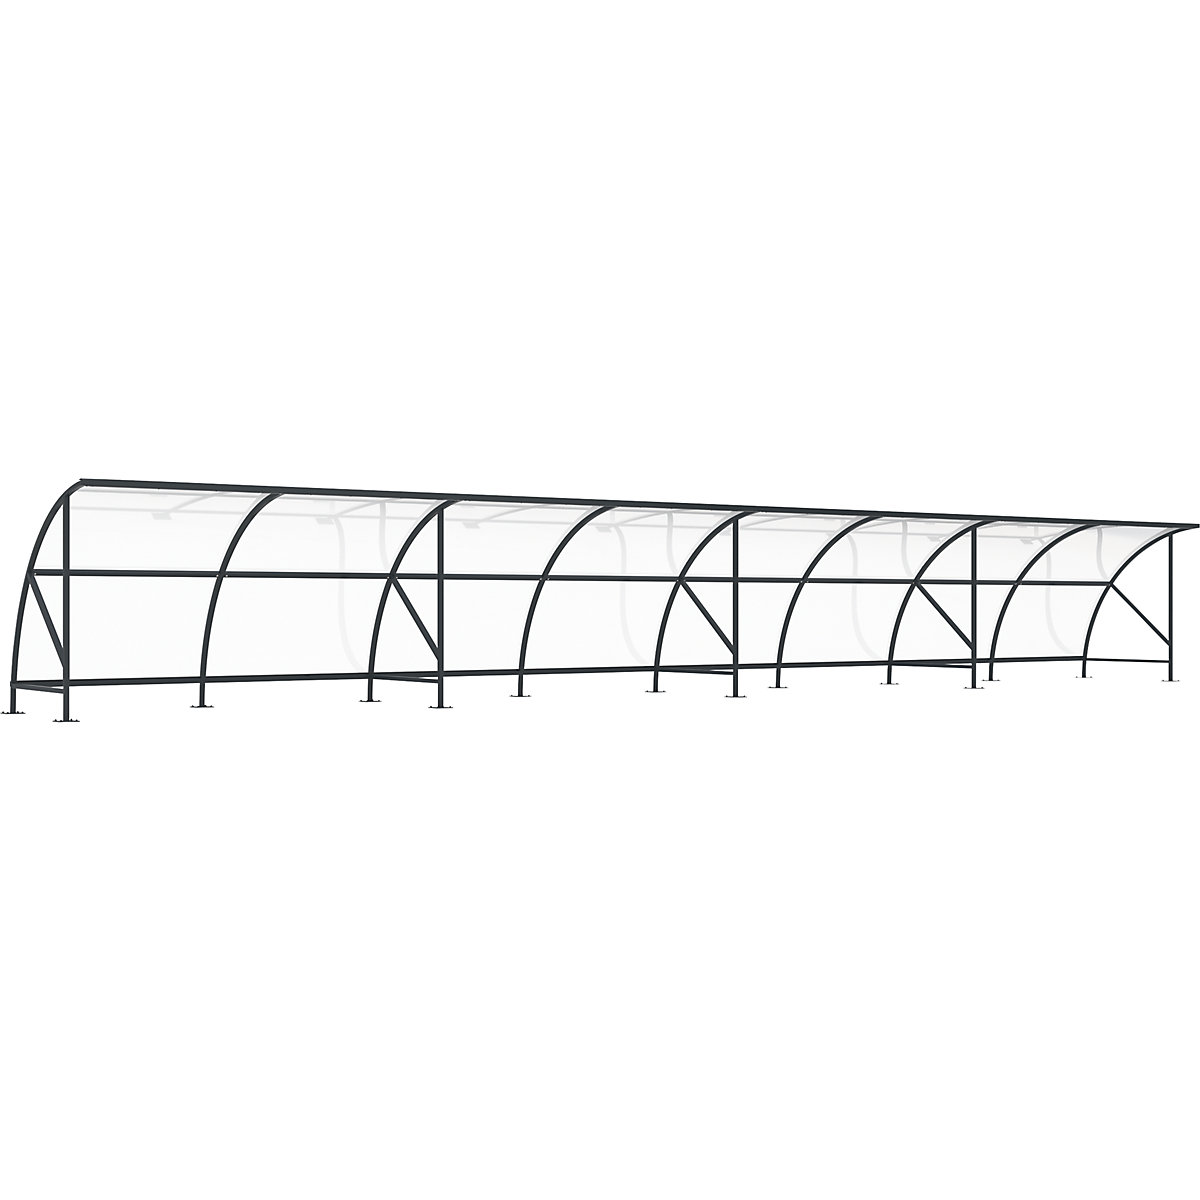 Bicycle shelter, made of polycarbonate, WxD 16450 x 2100 mm, charcoal RAL 7016-4